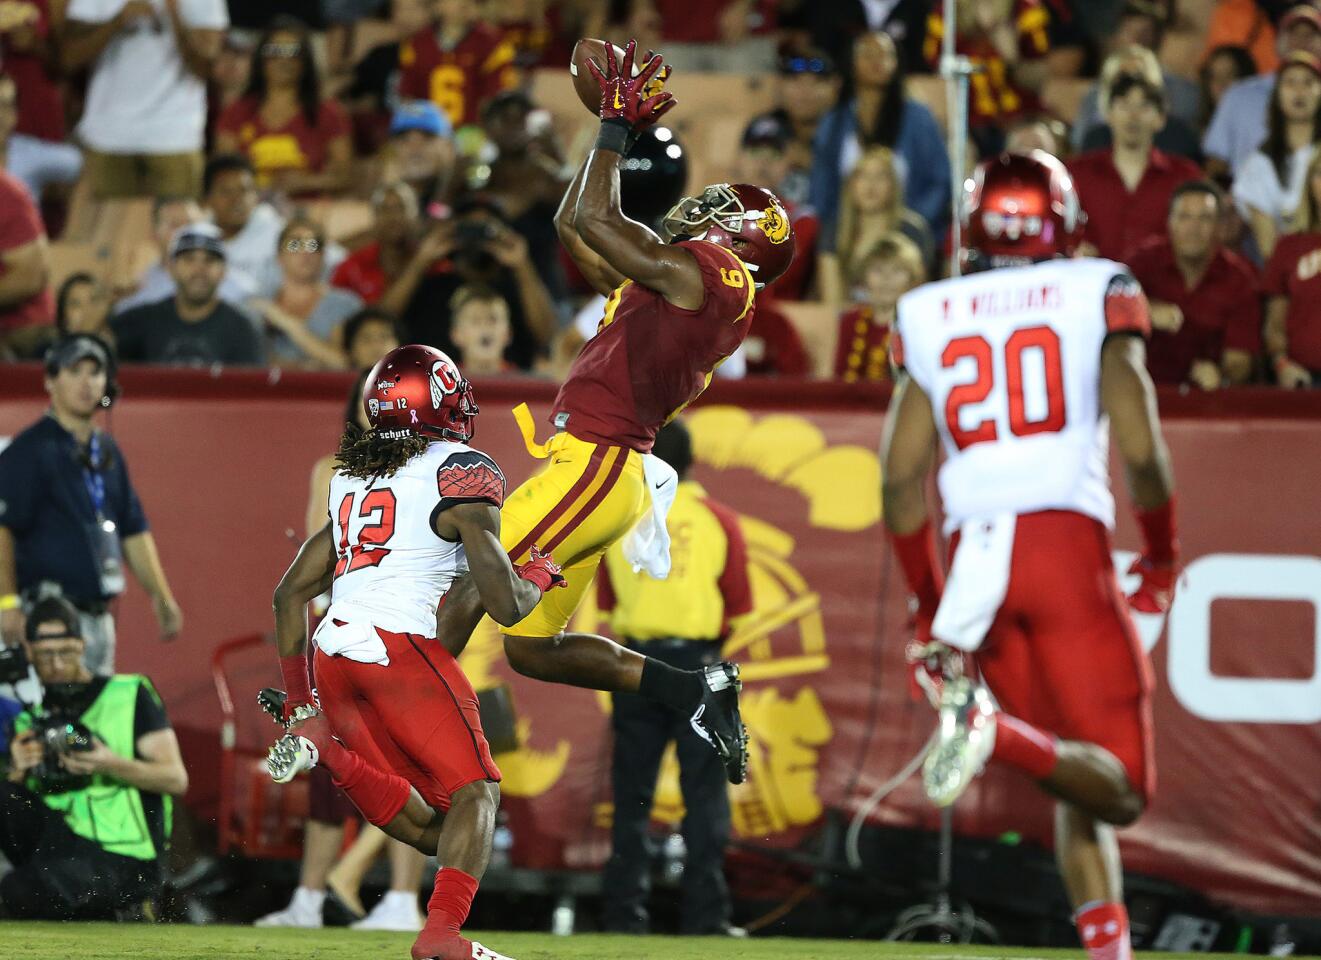 USC receiver Juju Smith-Schuster hauls in a 25-yard touchdown pass in the fourth quarter of a game against Utah at the Coliseum on Oct. 24.